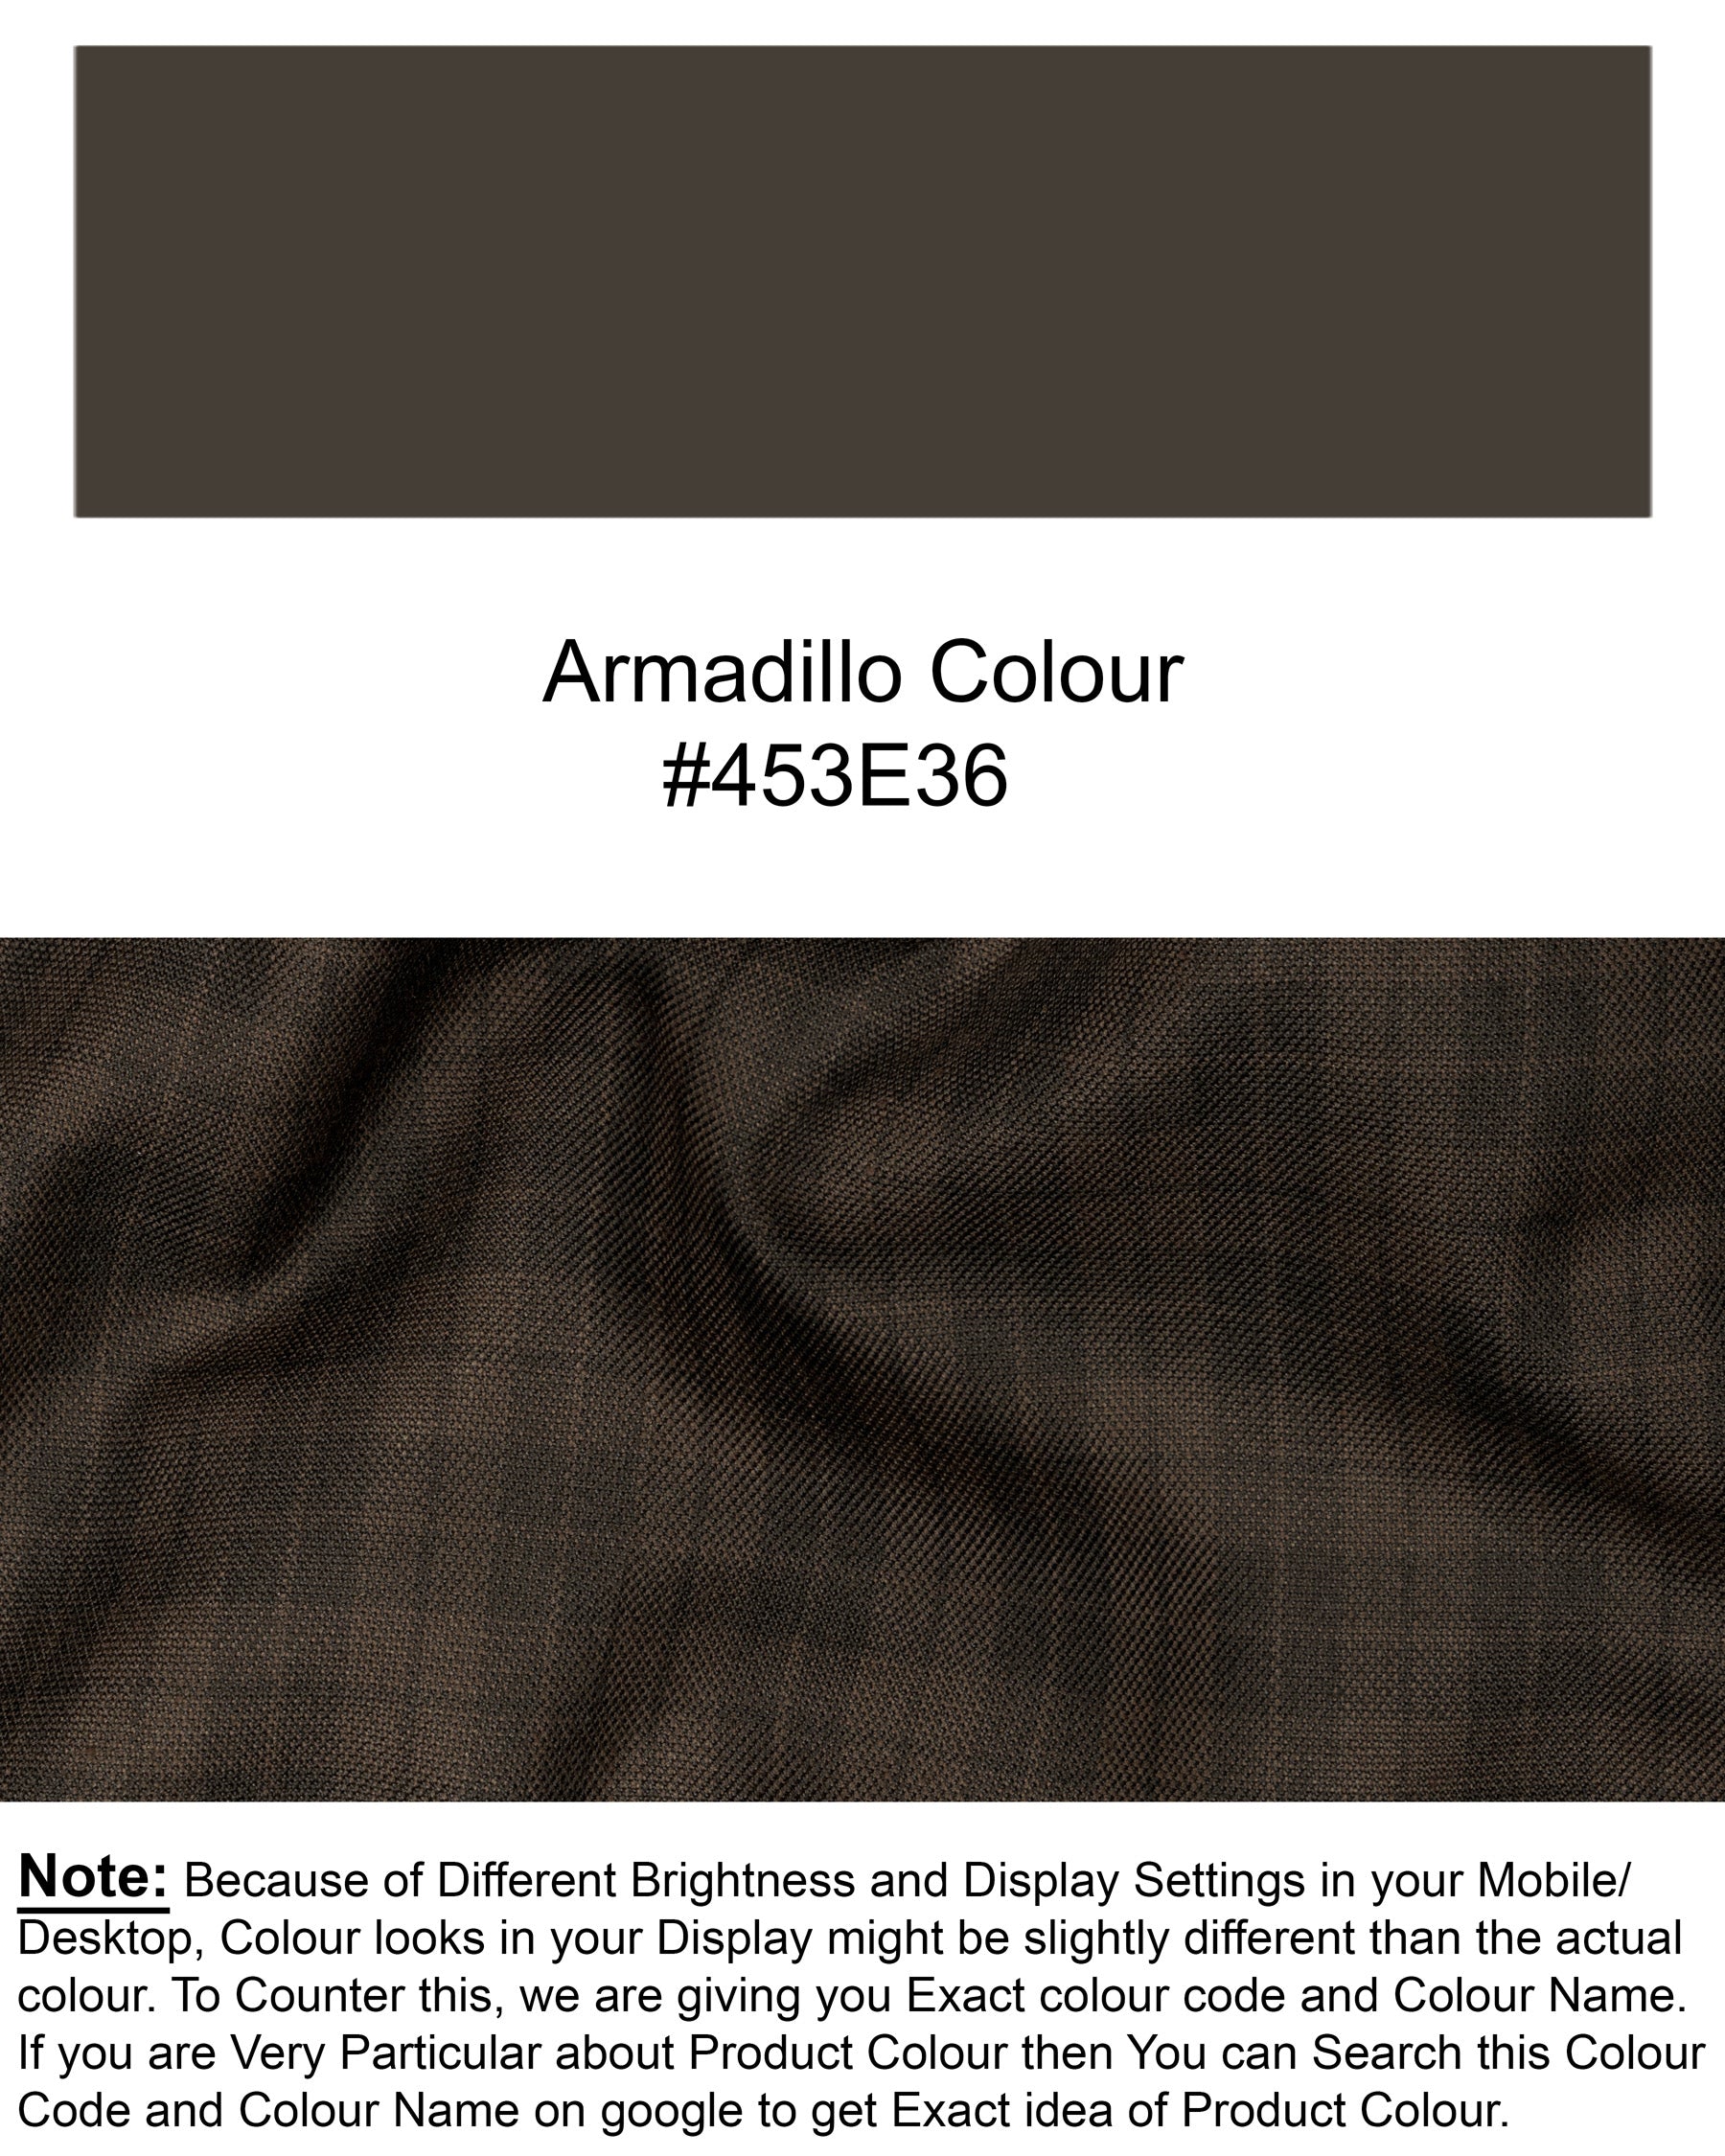 Armadillo Brown Plaid Double-breasted Suit ST1755-DB-36, ST1755-DB-38, ST1755-DB-40, ST1755-DB-42, ST1755-DB-44, ST1755-DB-46, ST1755-DB-48, ST1755-DB-50, ST1755-DB-52, ST1755-DB-54, ST1755-DB-56, ST1755-DB-58, ST1755-DB-60